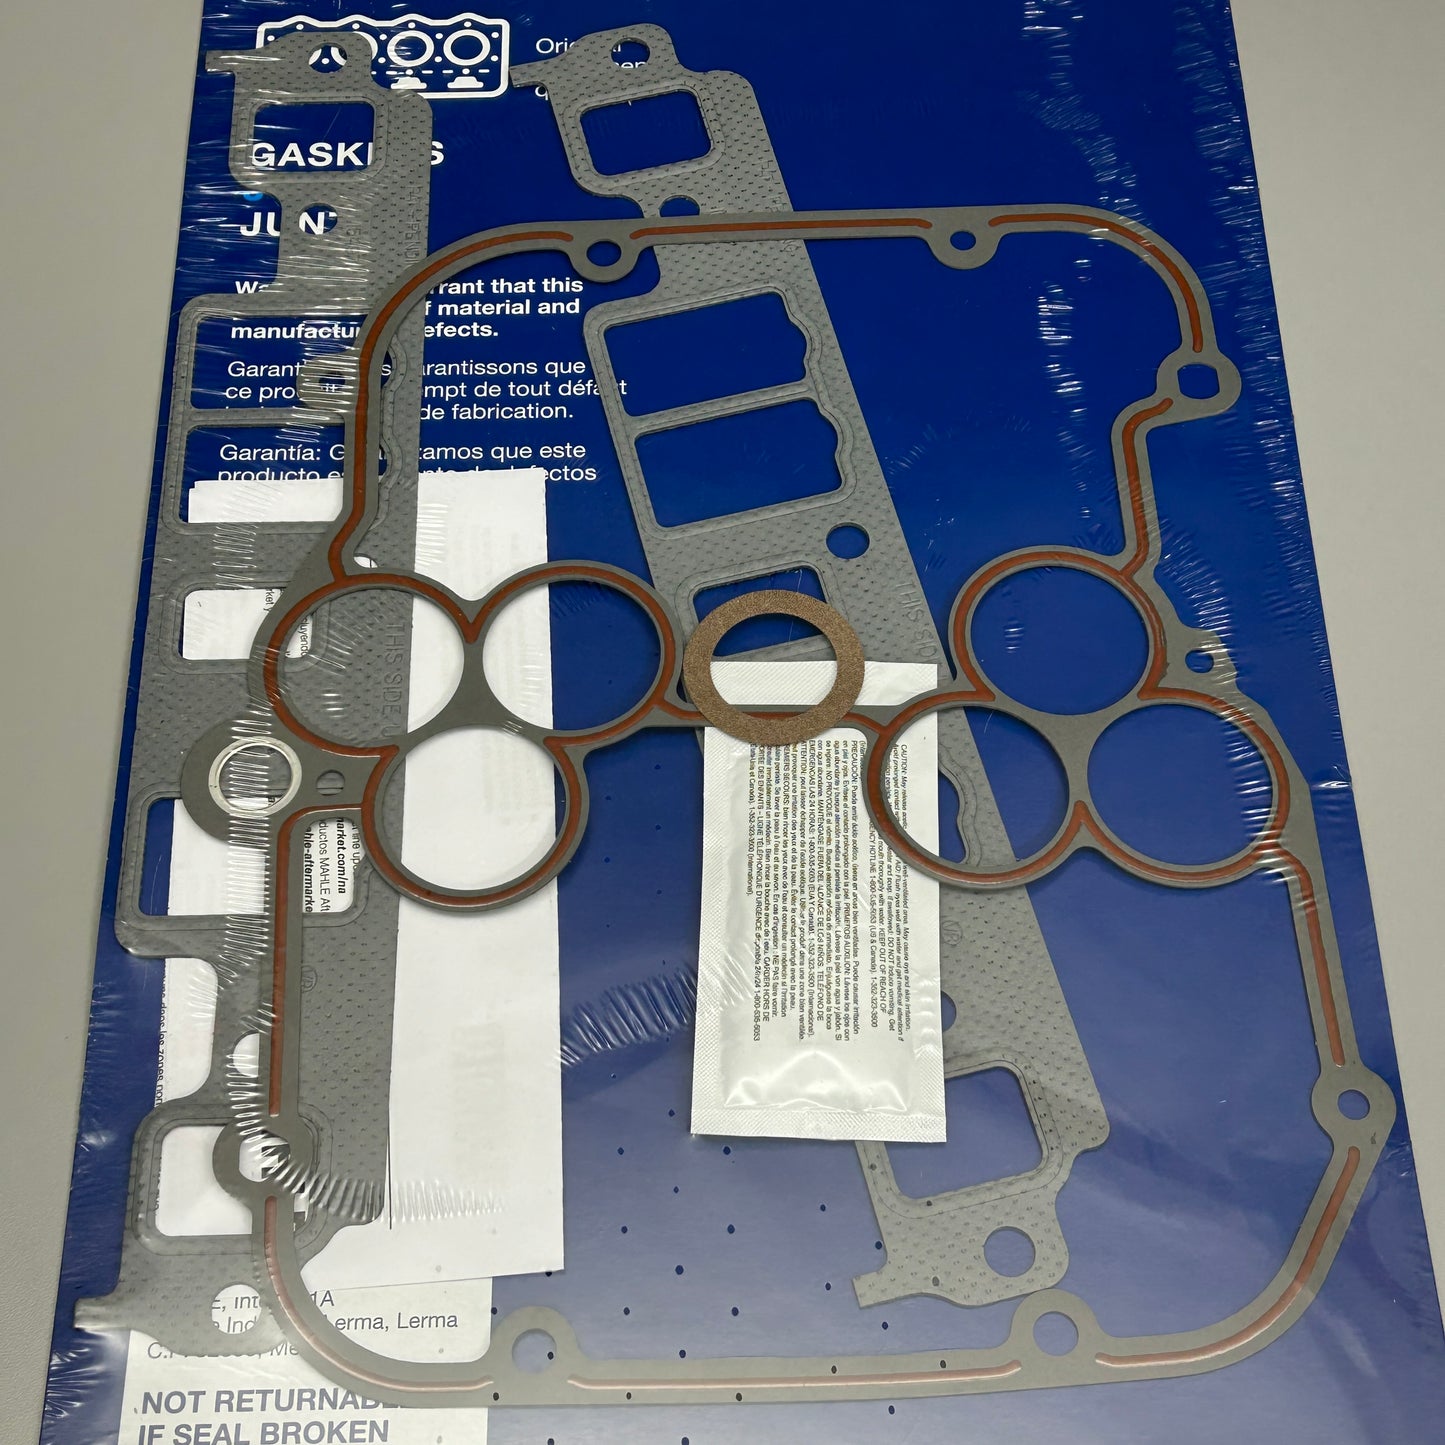 MAHLE Engine Intake Manifold Gasket Set for GMC Truck MS15497 (New)